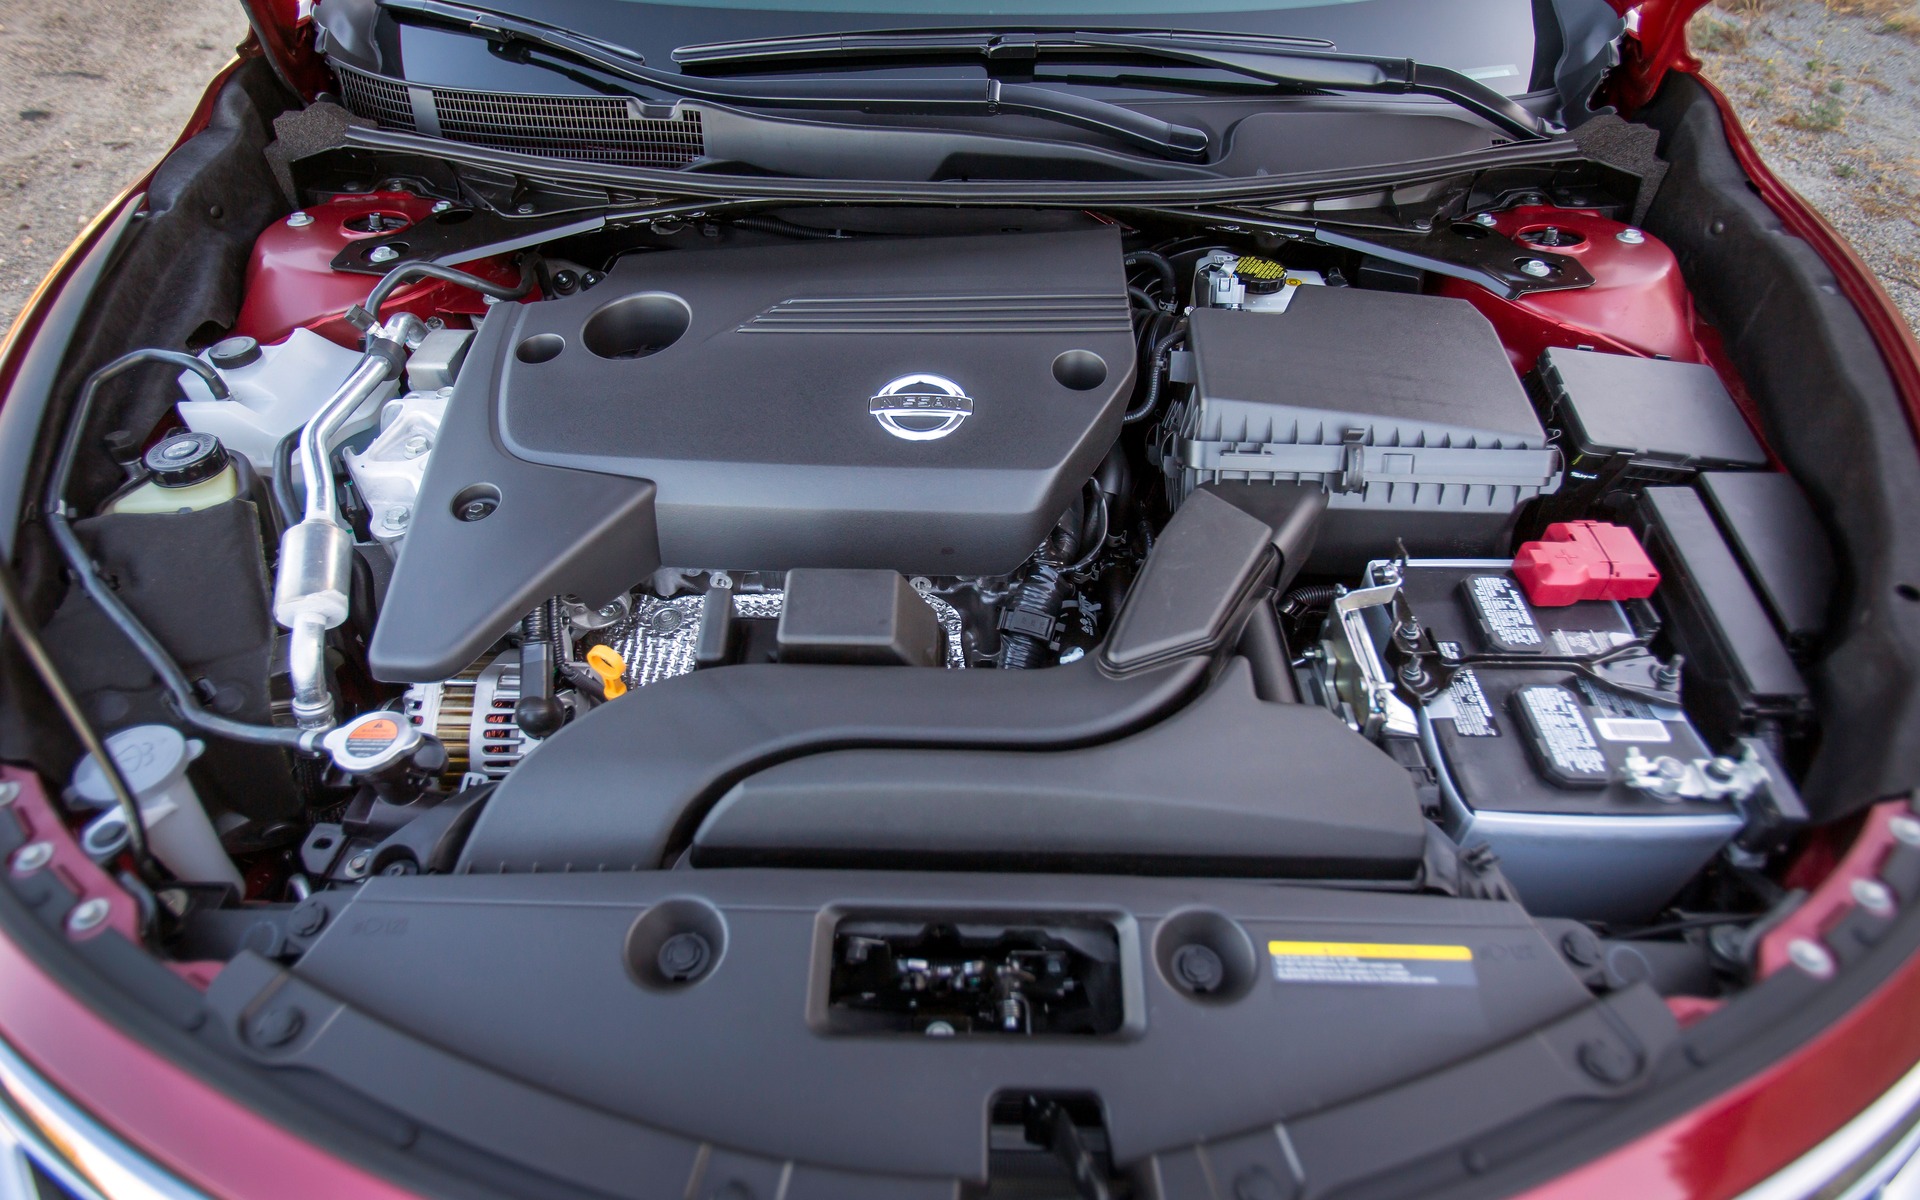 The 2.5L four-cylinder engine holds its own, even on steep inclines.